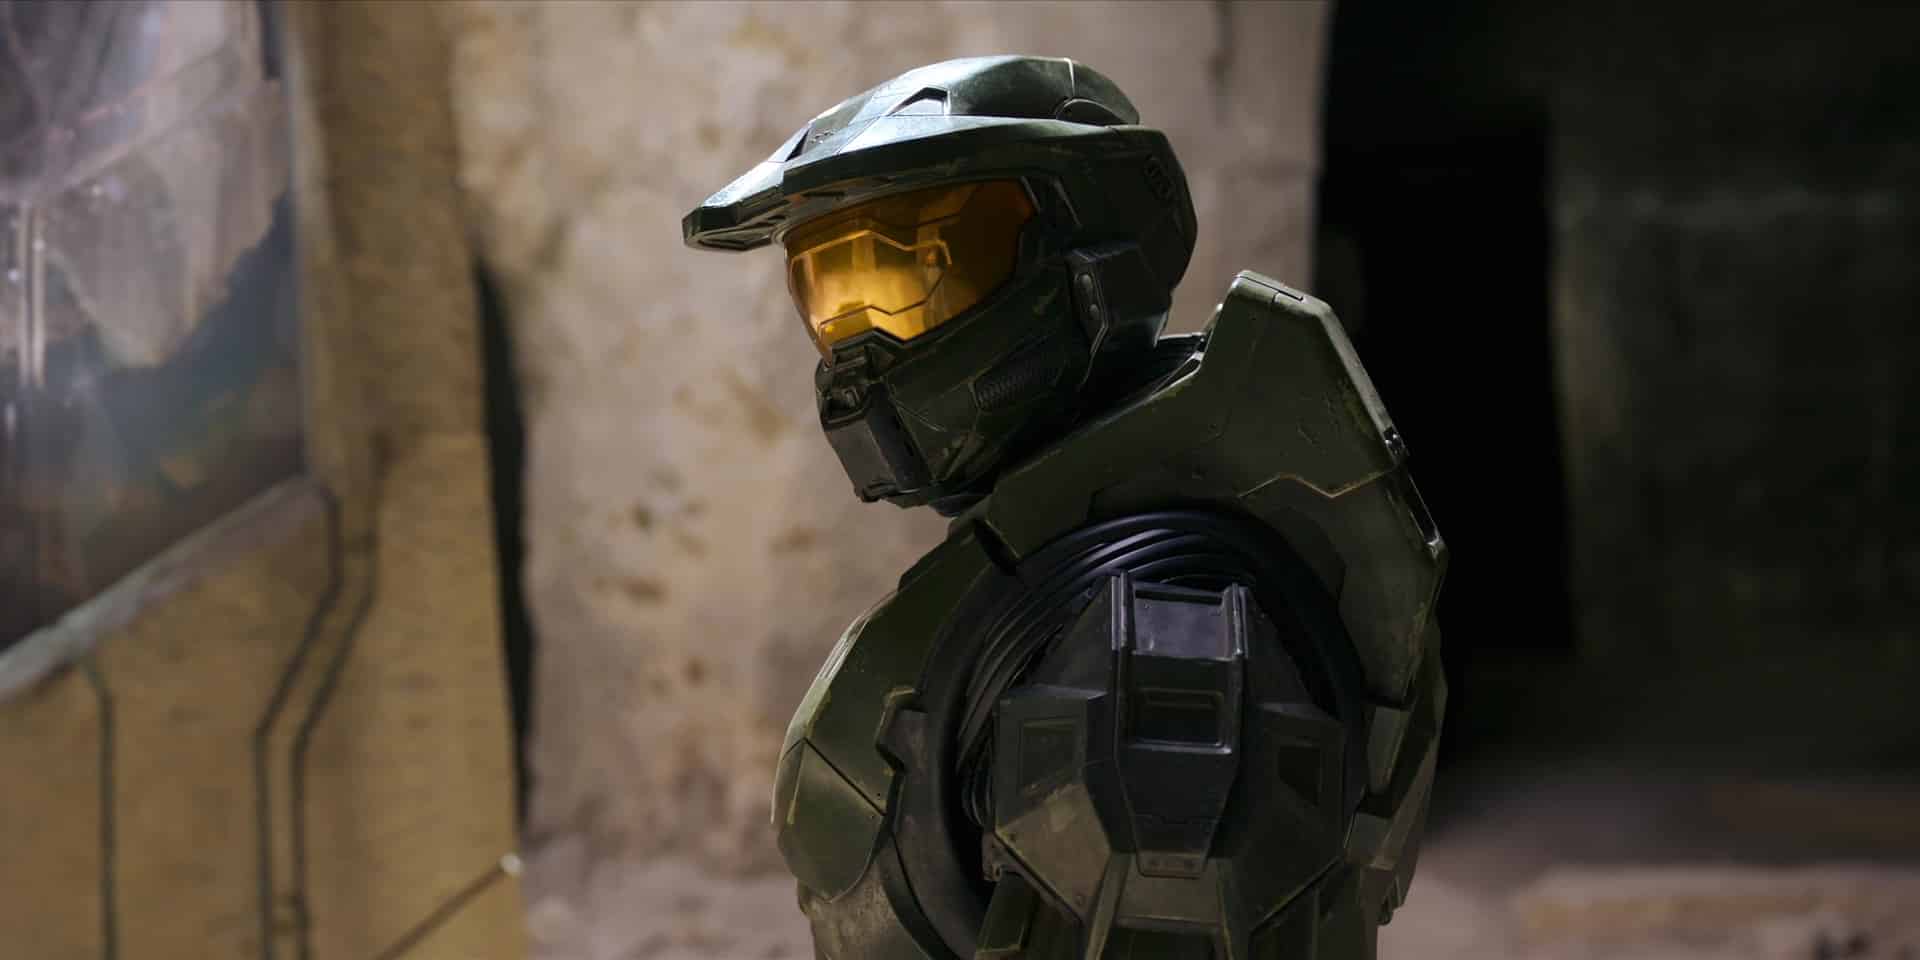 Halo TV Show: When Does Episode 4 Come Out? - IGN